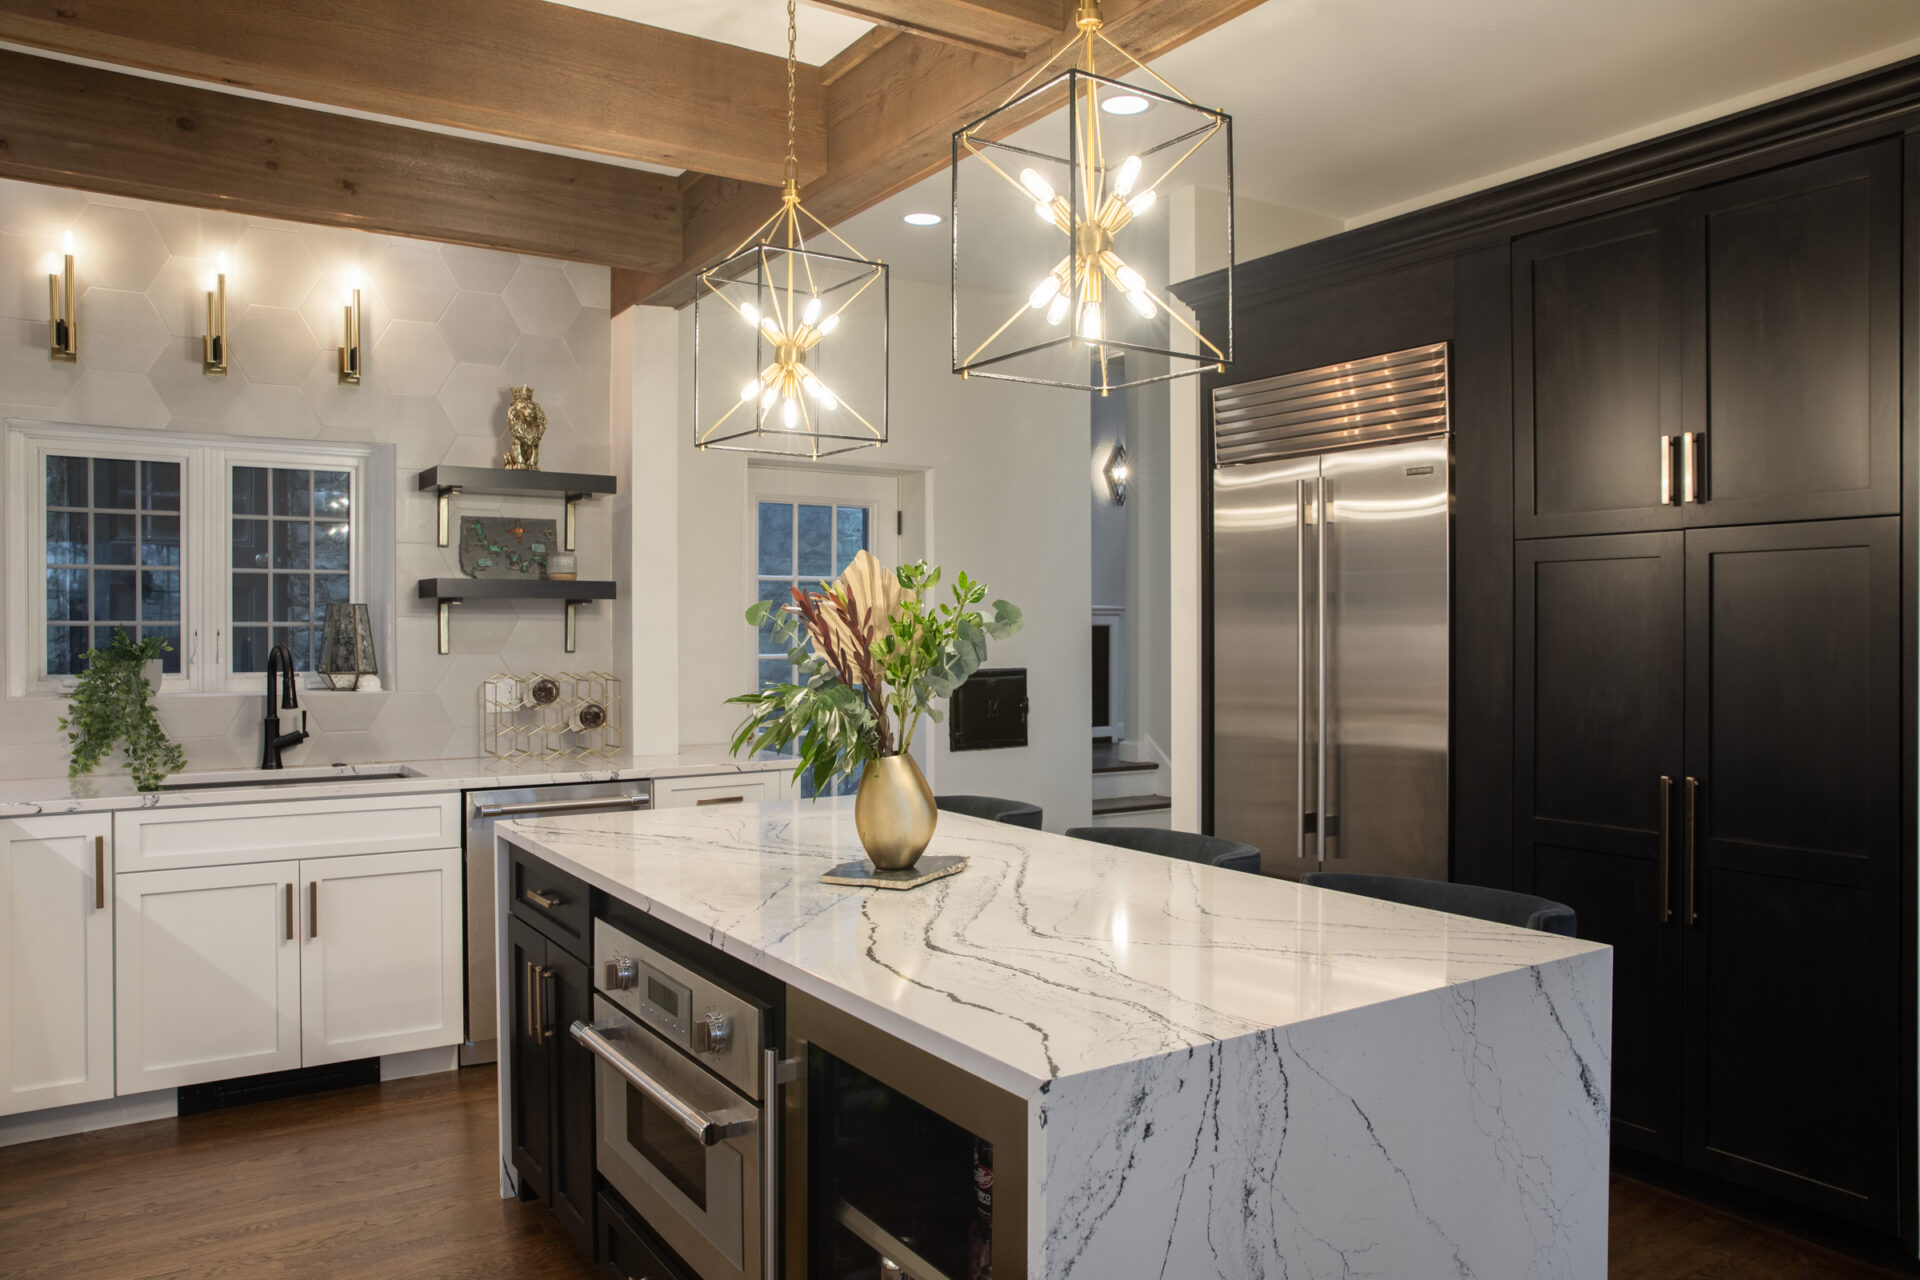 Modern kitchen remodel with white marble waterfall-style countertop, island, white cabinets, and modern pendant lighting over island.